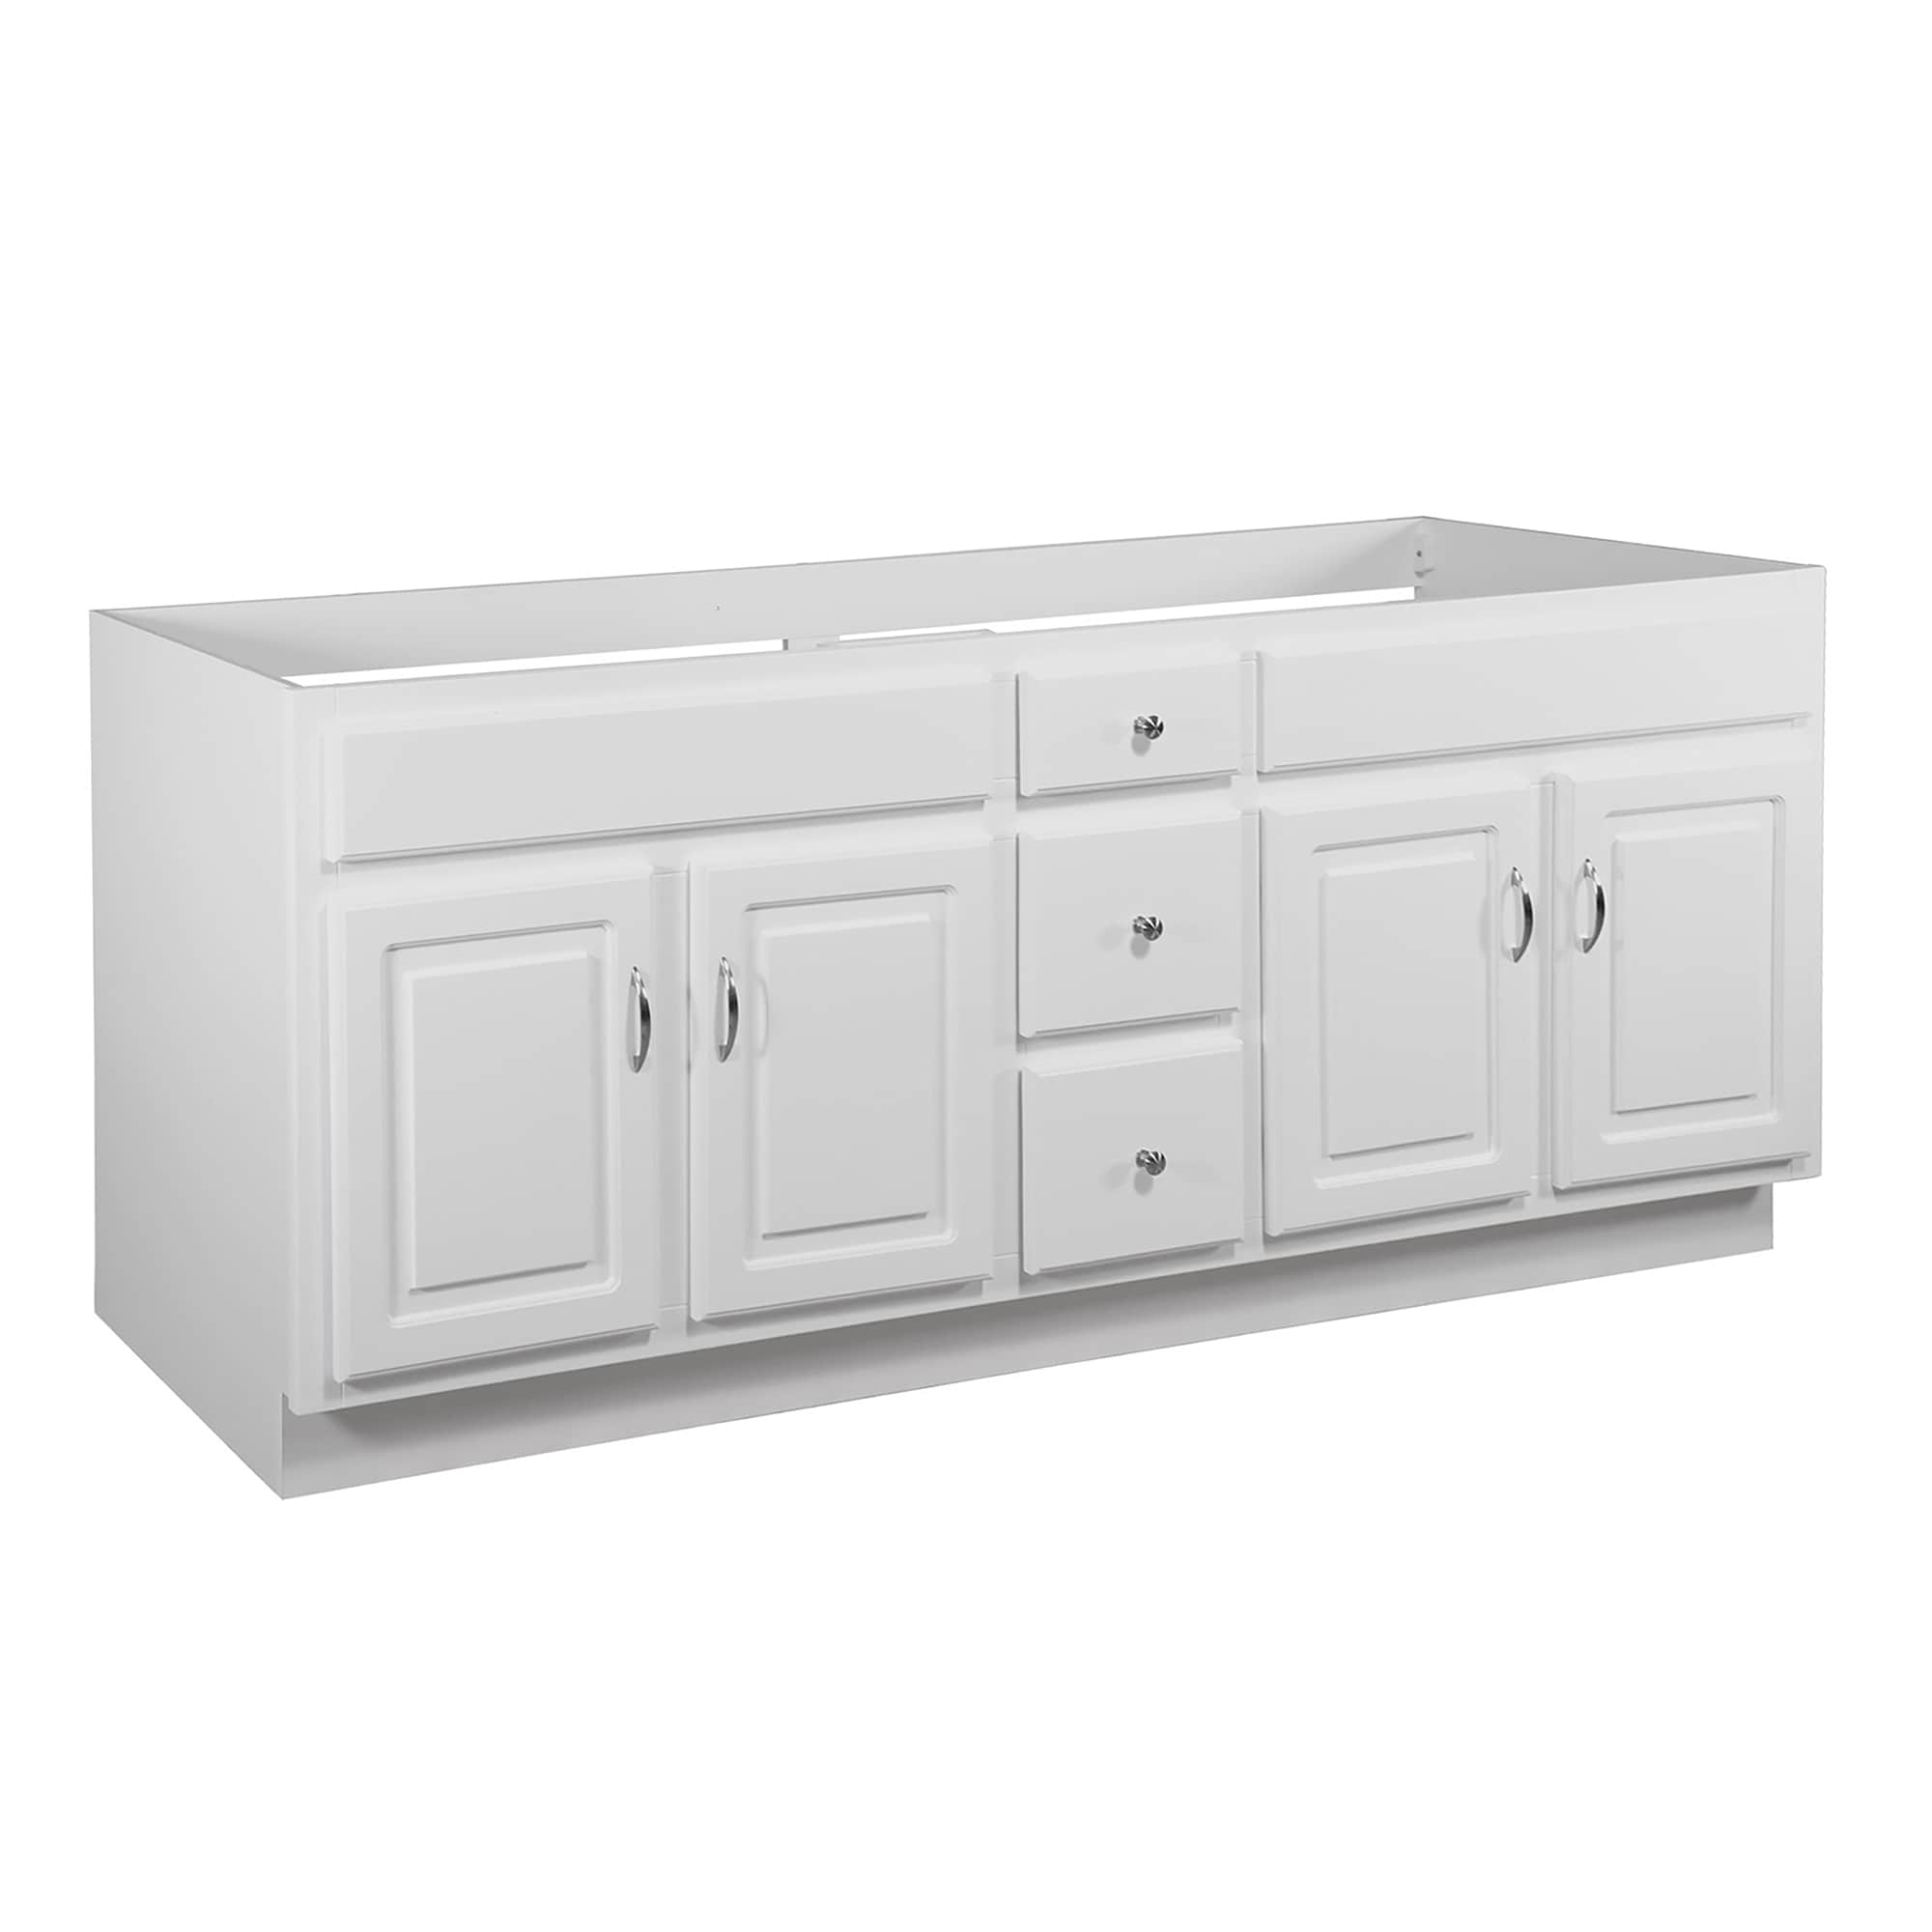 Bathroom Vanities Without Tops At, Double Sink Vanity Cabinet Only